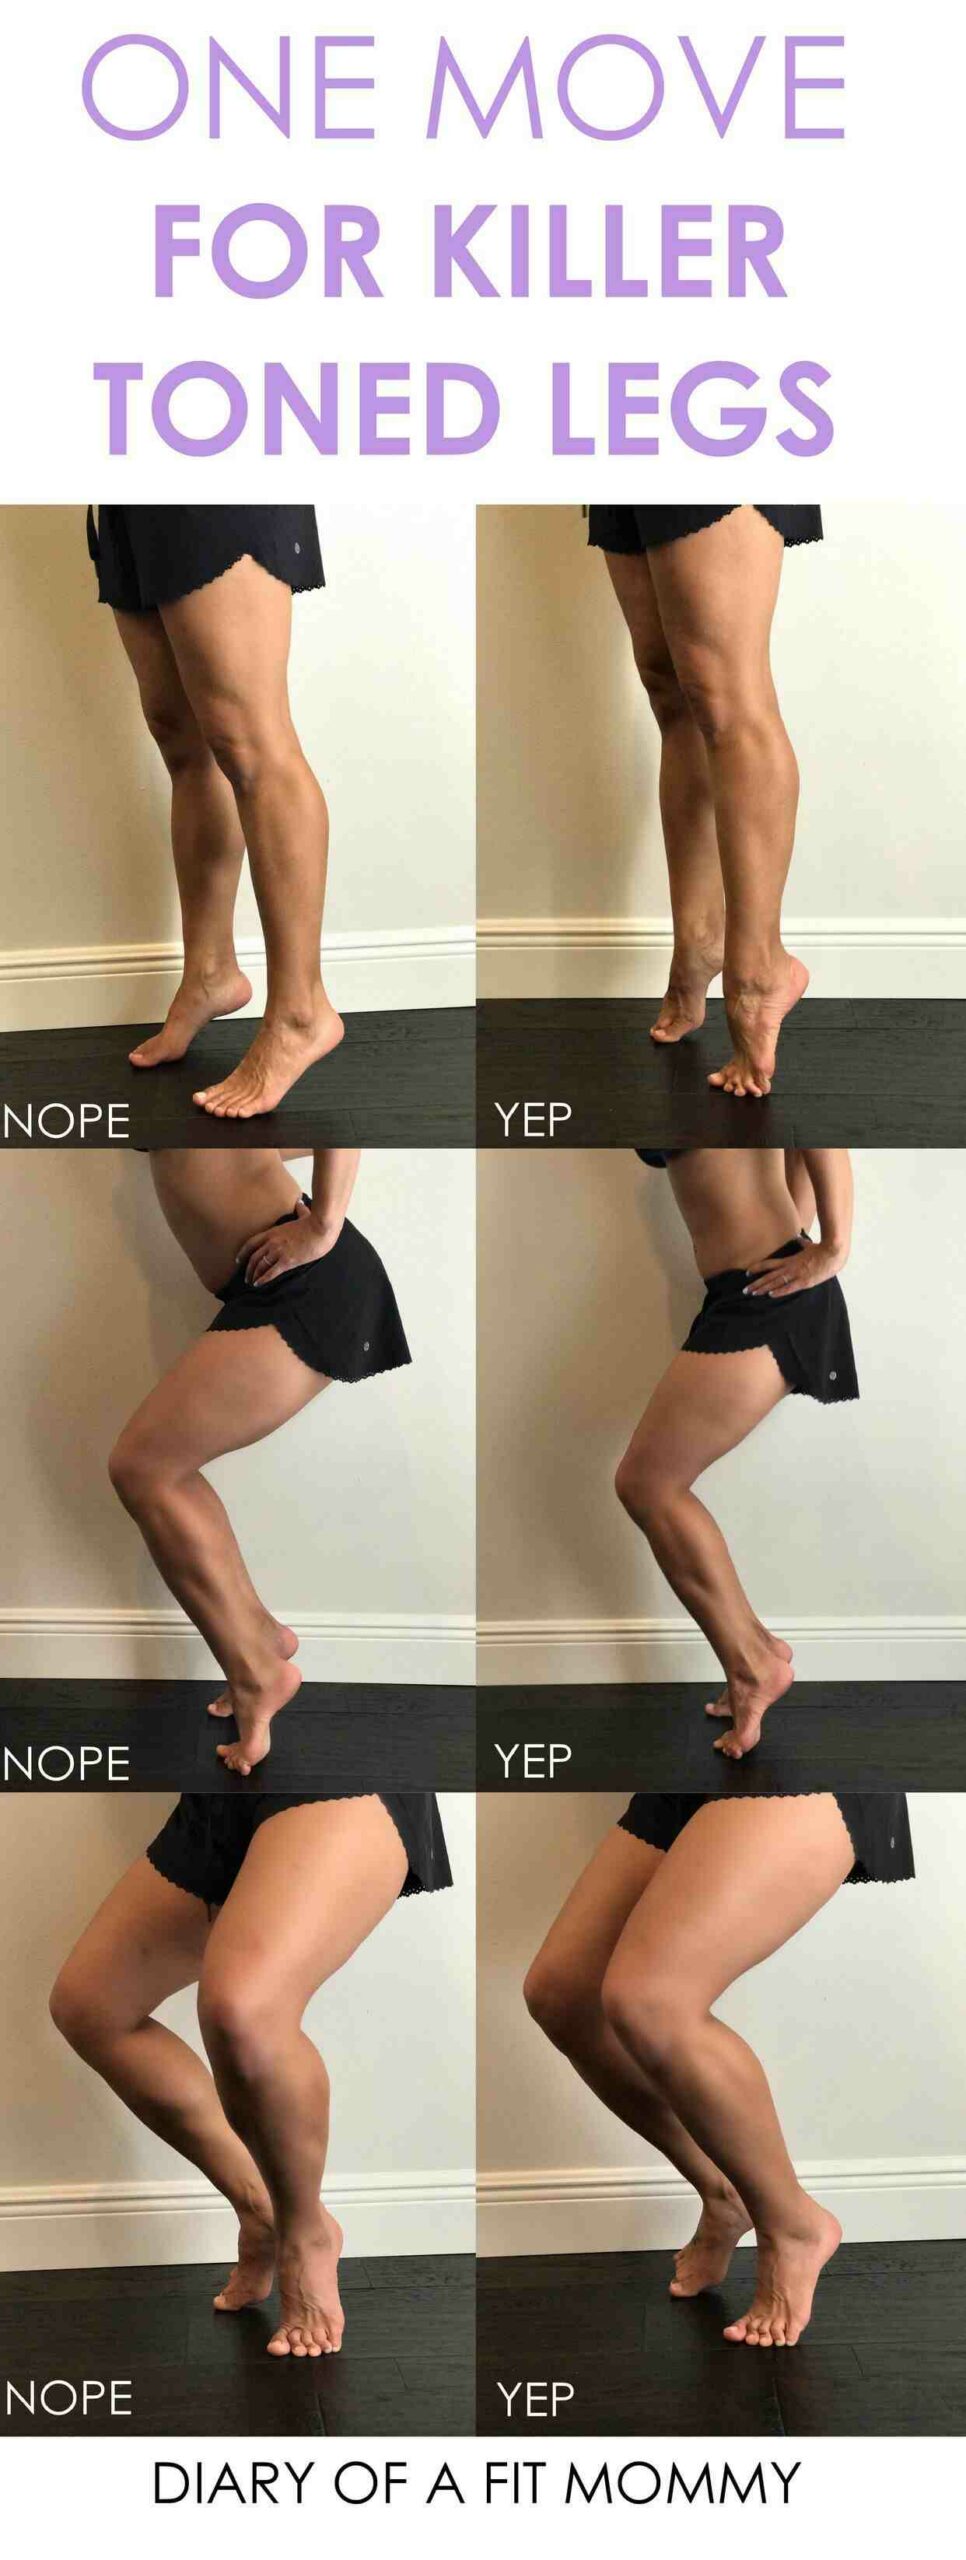 How long does it take to tone legs?